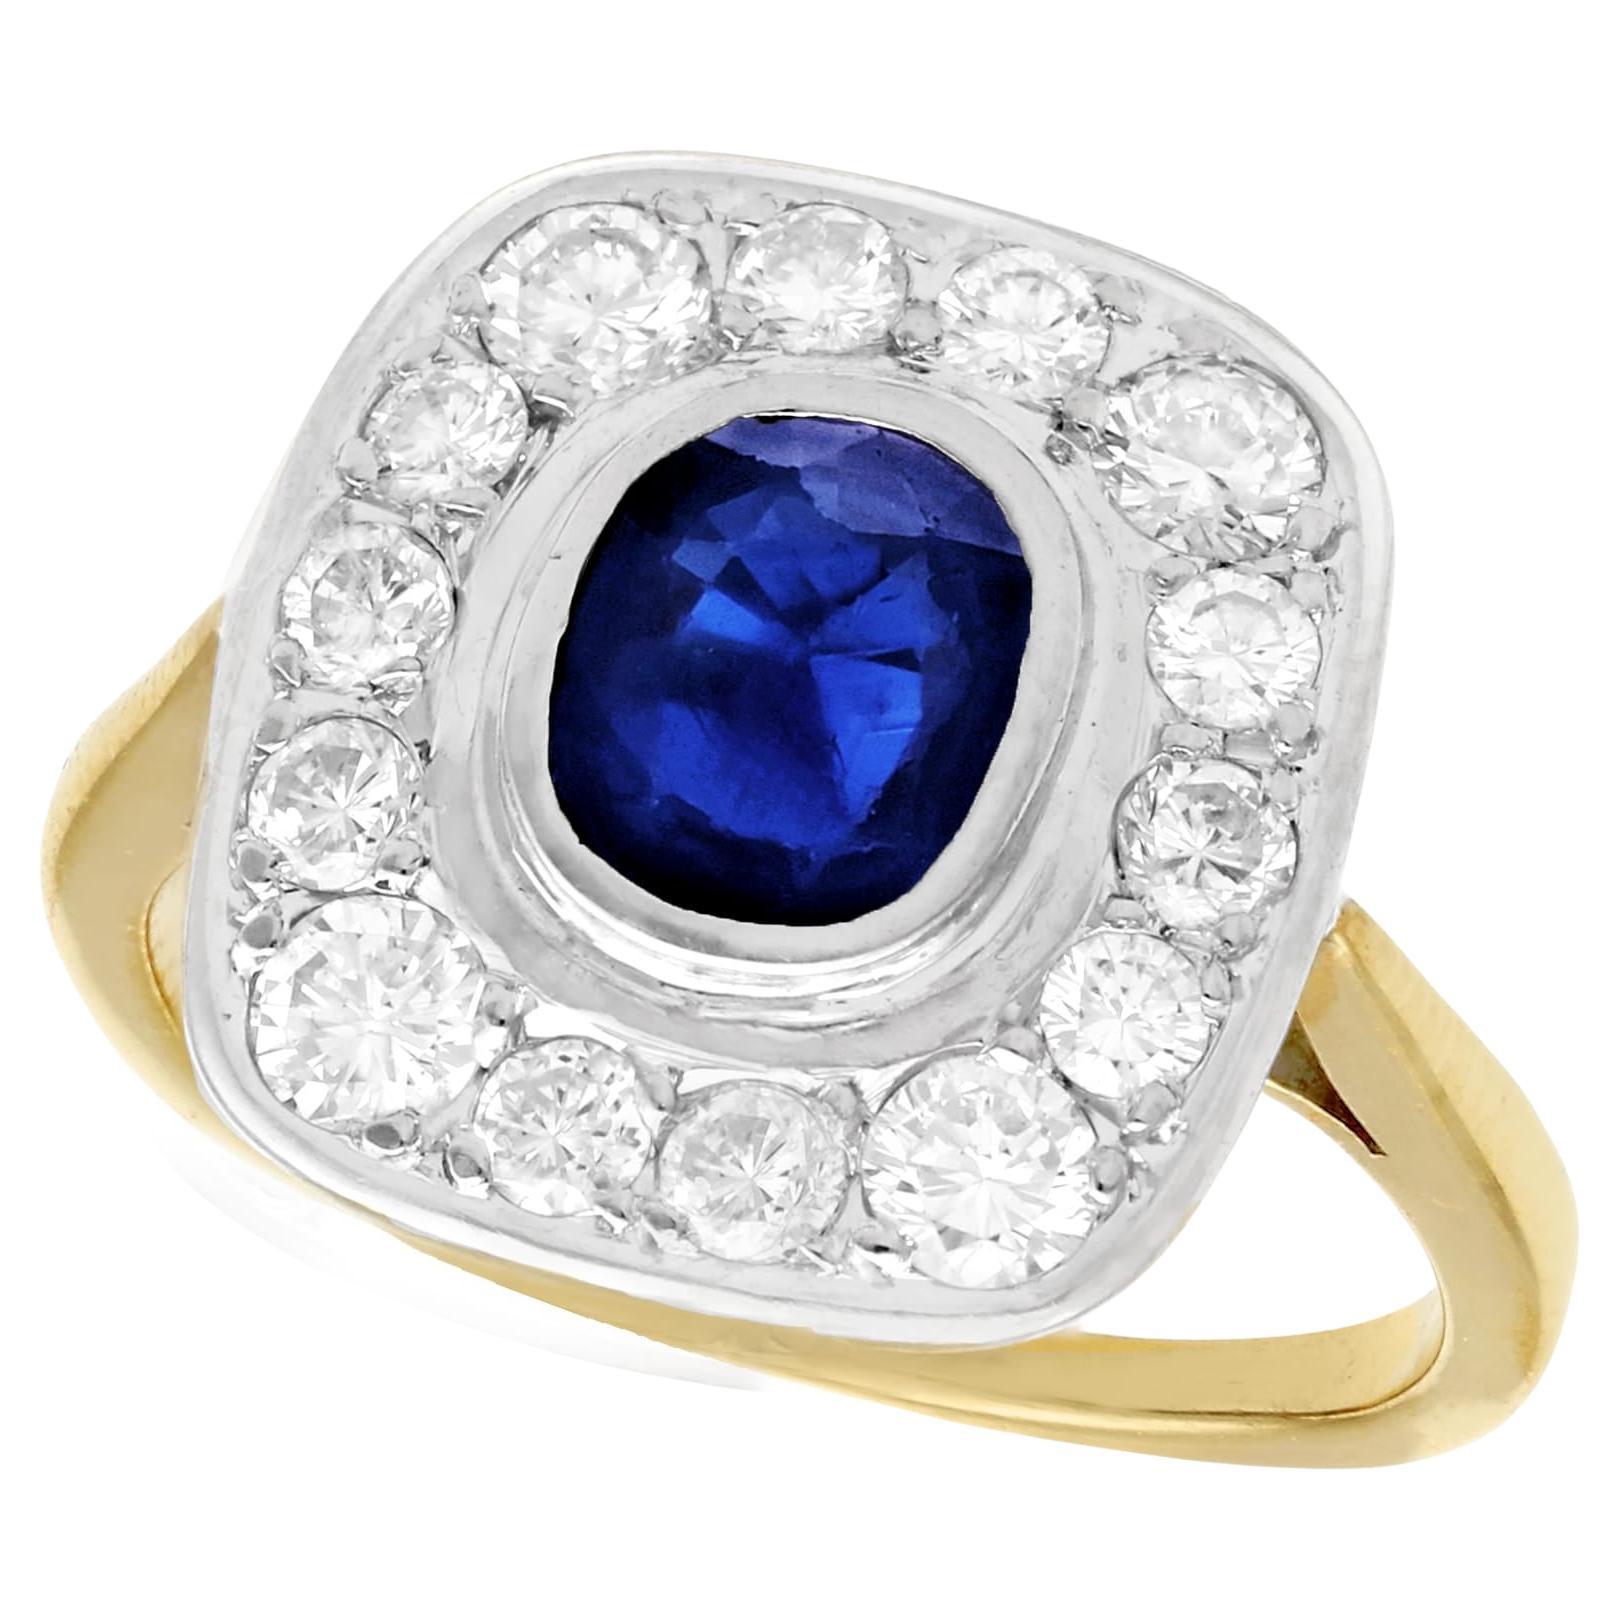 Vintage French 1.02 Carat Sapphire and 1.13 Carat Diamond Yellow Gold Ring